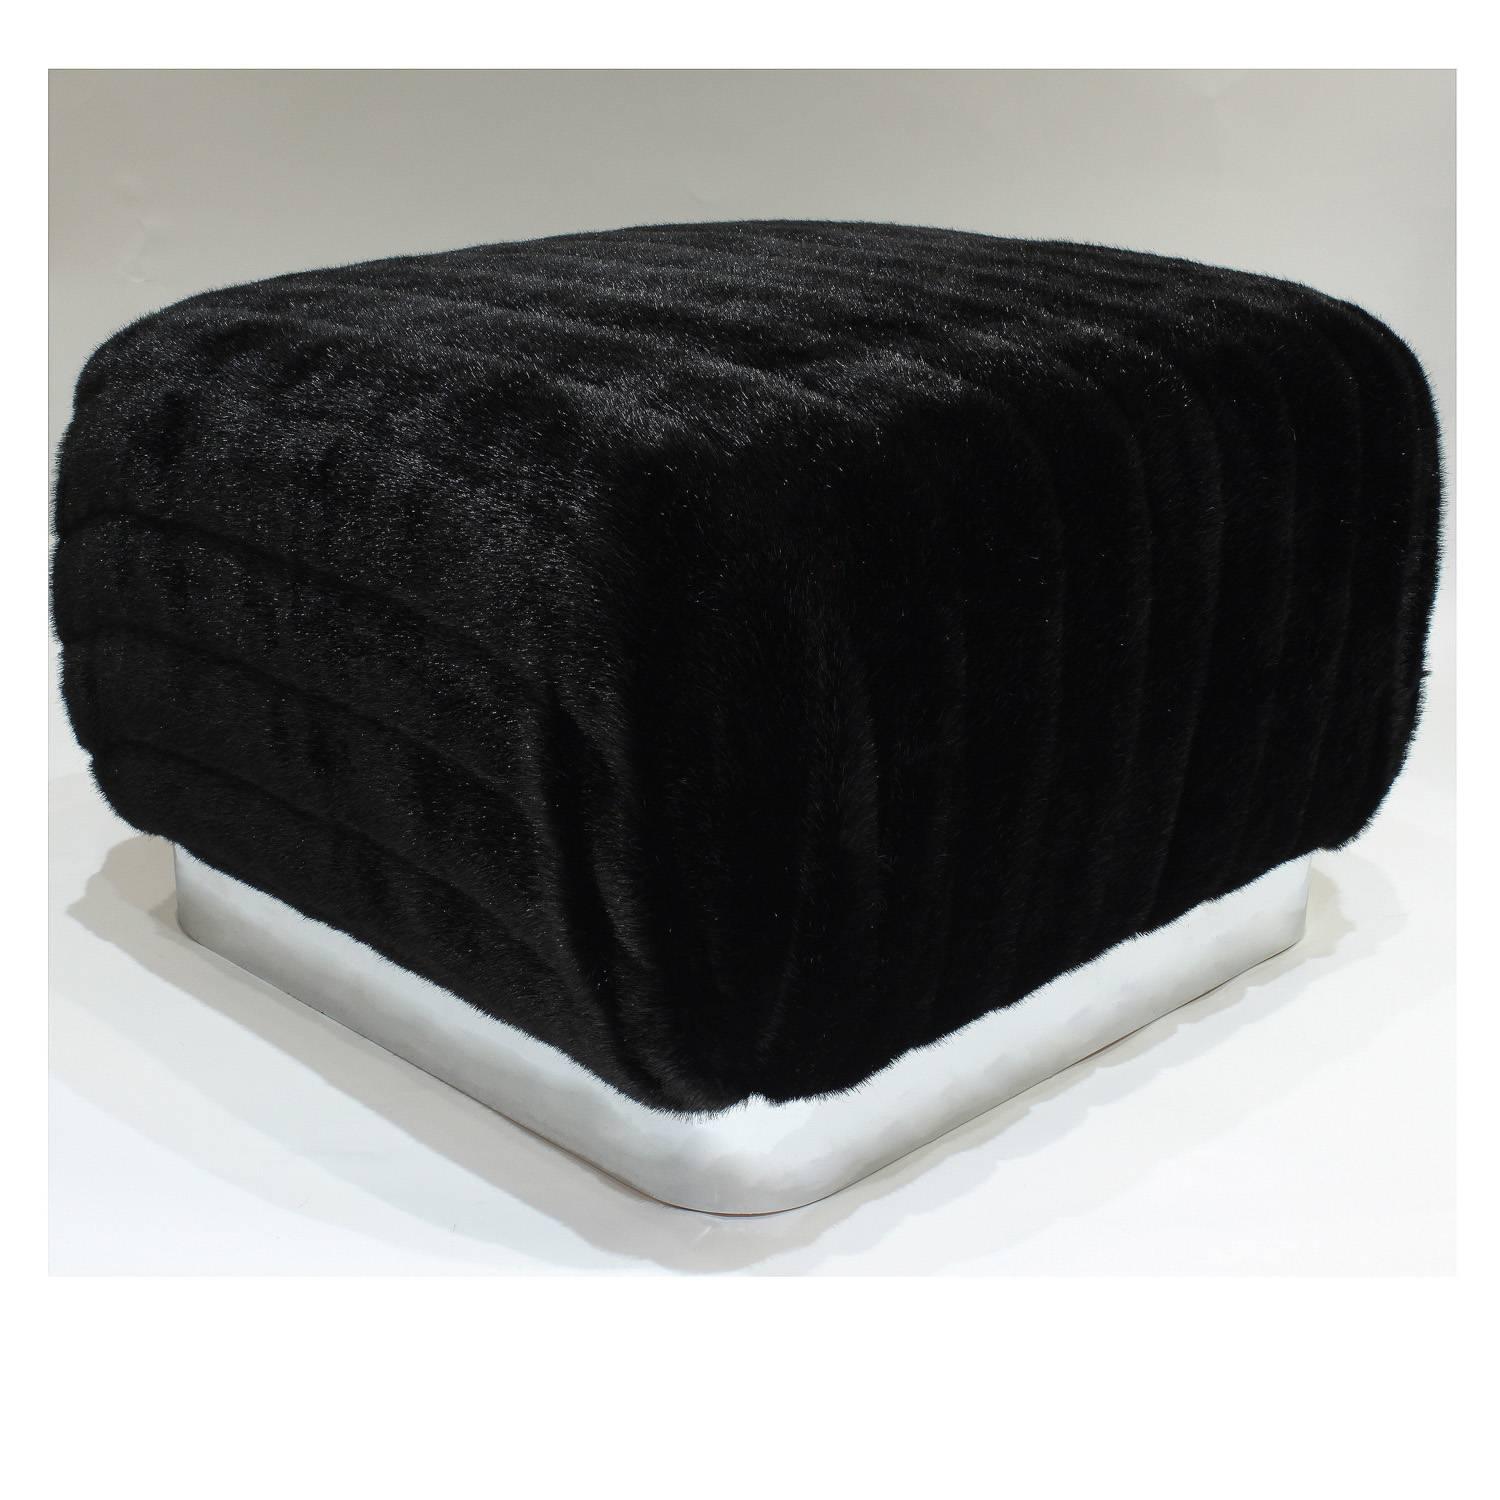 Large square Souffle ottoman newly upholstered in faux mink with ploished steel base by Karl Springer, American, 1970s.